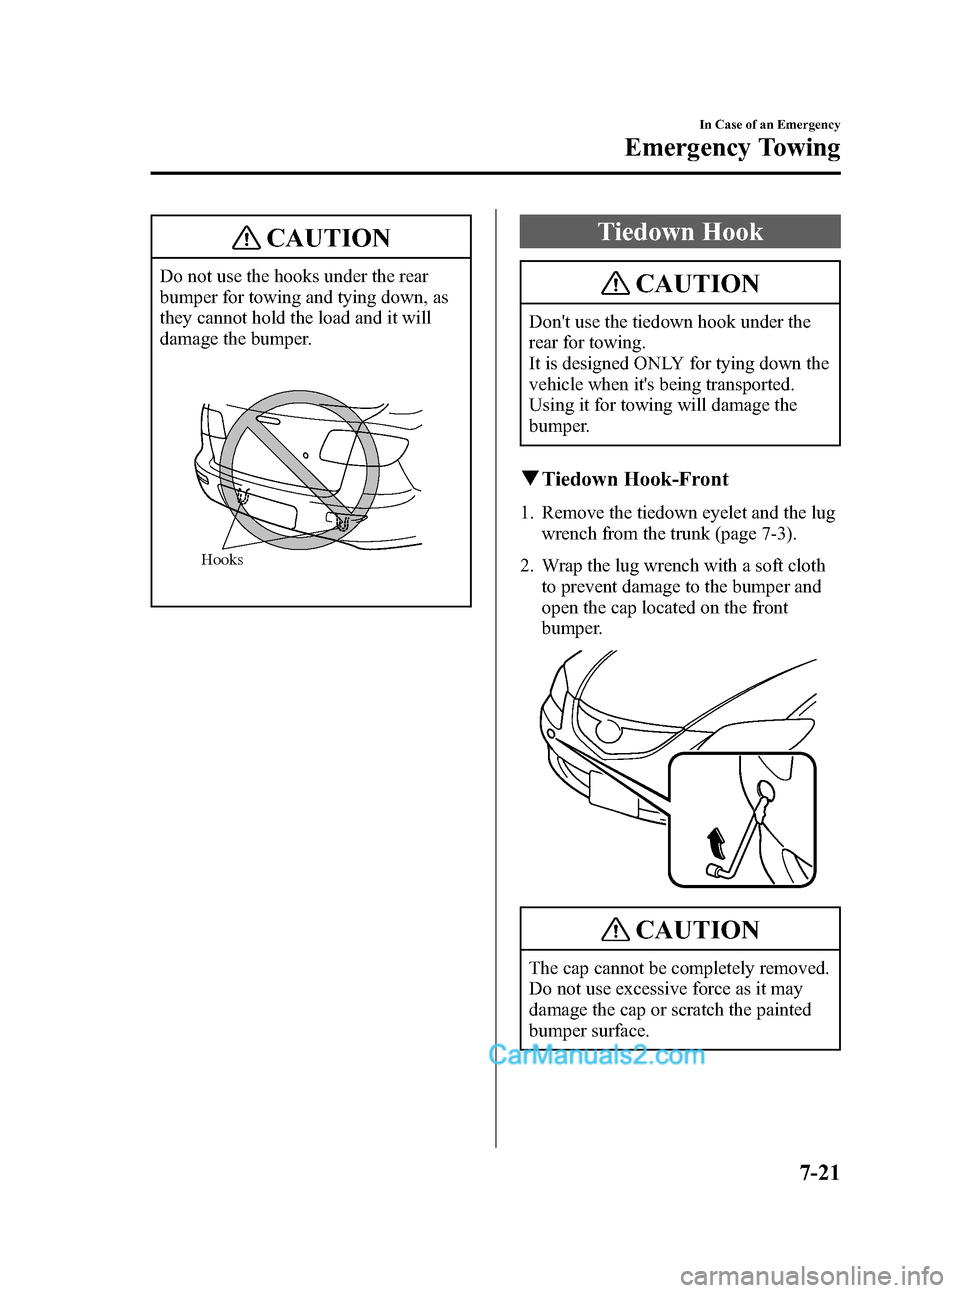 MAZDA MODEL MAZDASPEED 3 2007  Owners Manual (in English) Black plate (273,1)
CAUTION
Do not use the hooks under the rear
bumper for towing and tying down, as
they cannot hold the load and it will
damage the bumper.
Hooks
Tiedown Hook
CAUTION
Dont use the t